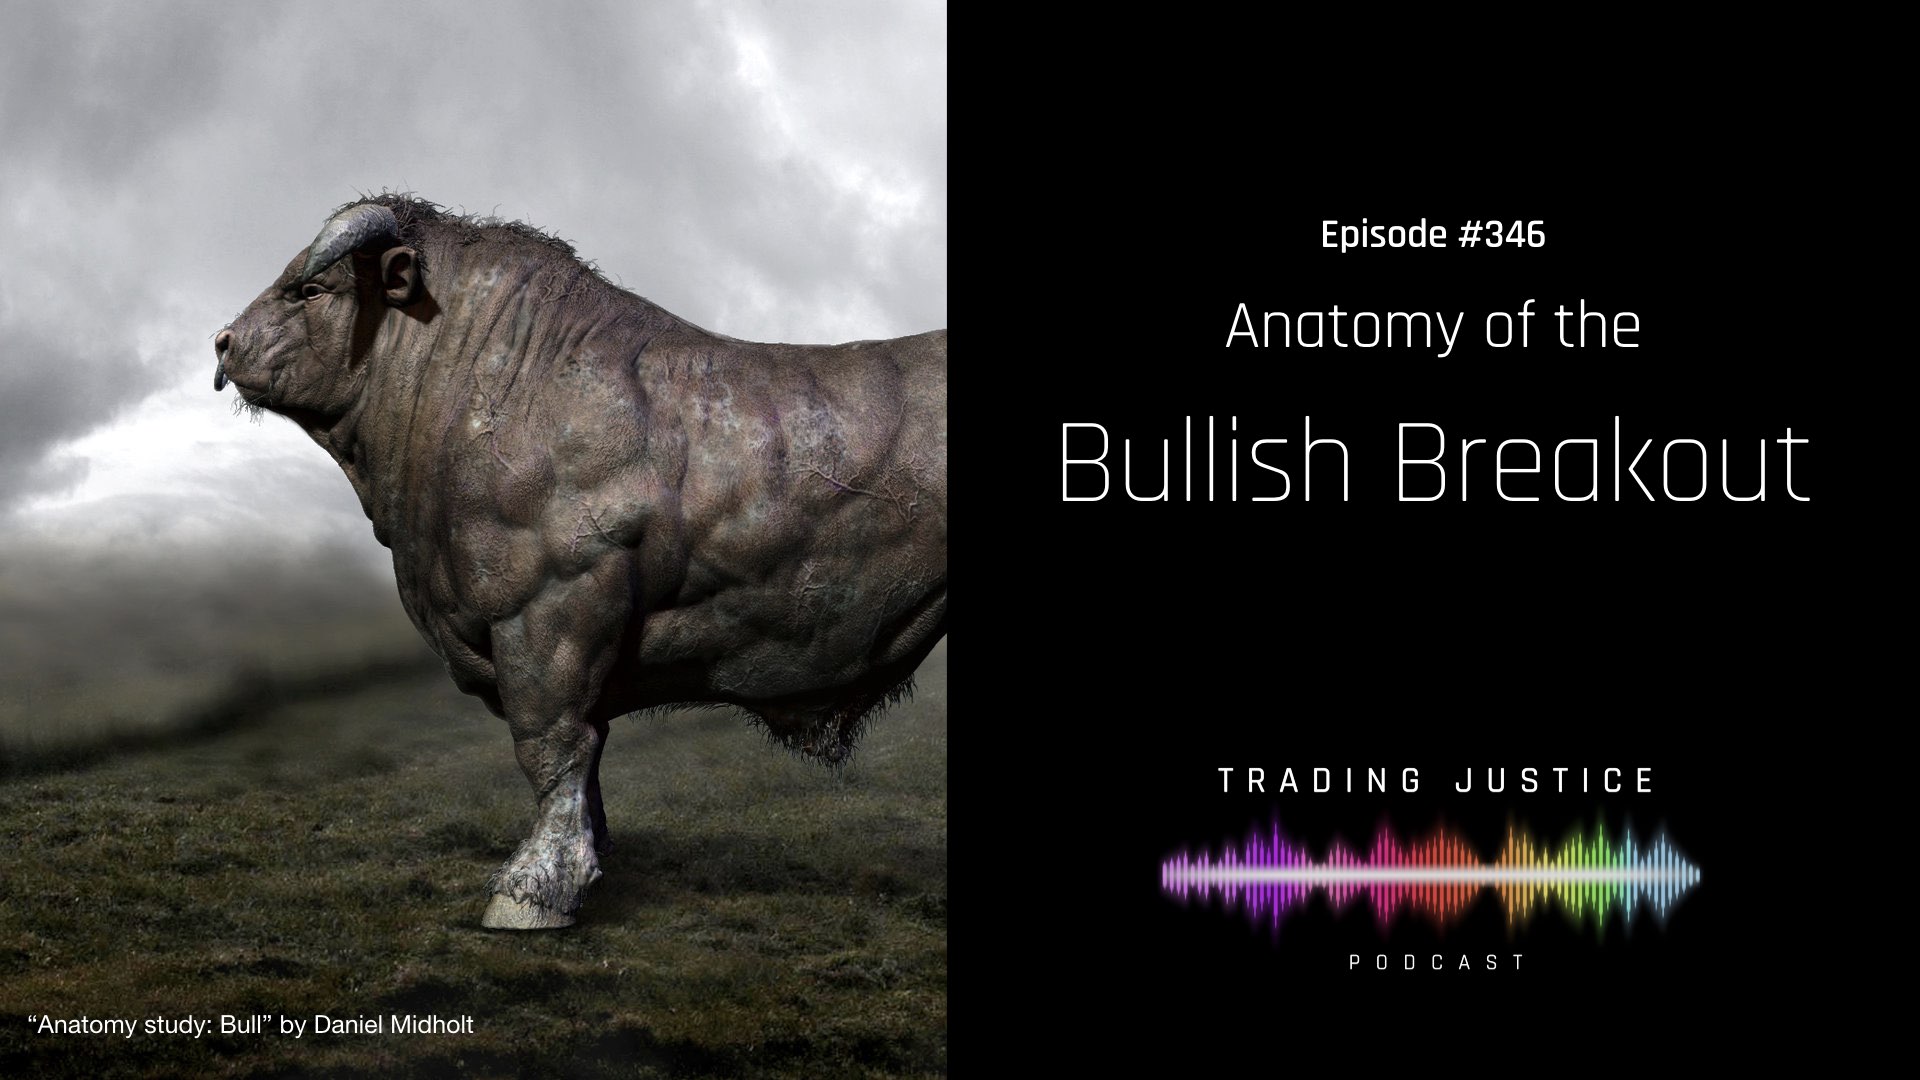 Episode 346: Anatomy of the Bullish Breakout | Trading Justice Podcast (Image: Anatomy study: Bull by Daniel Midholt)